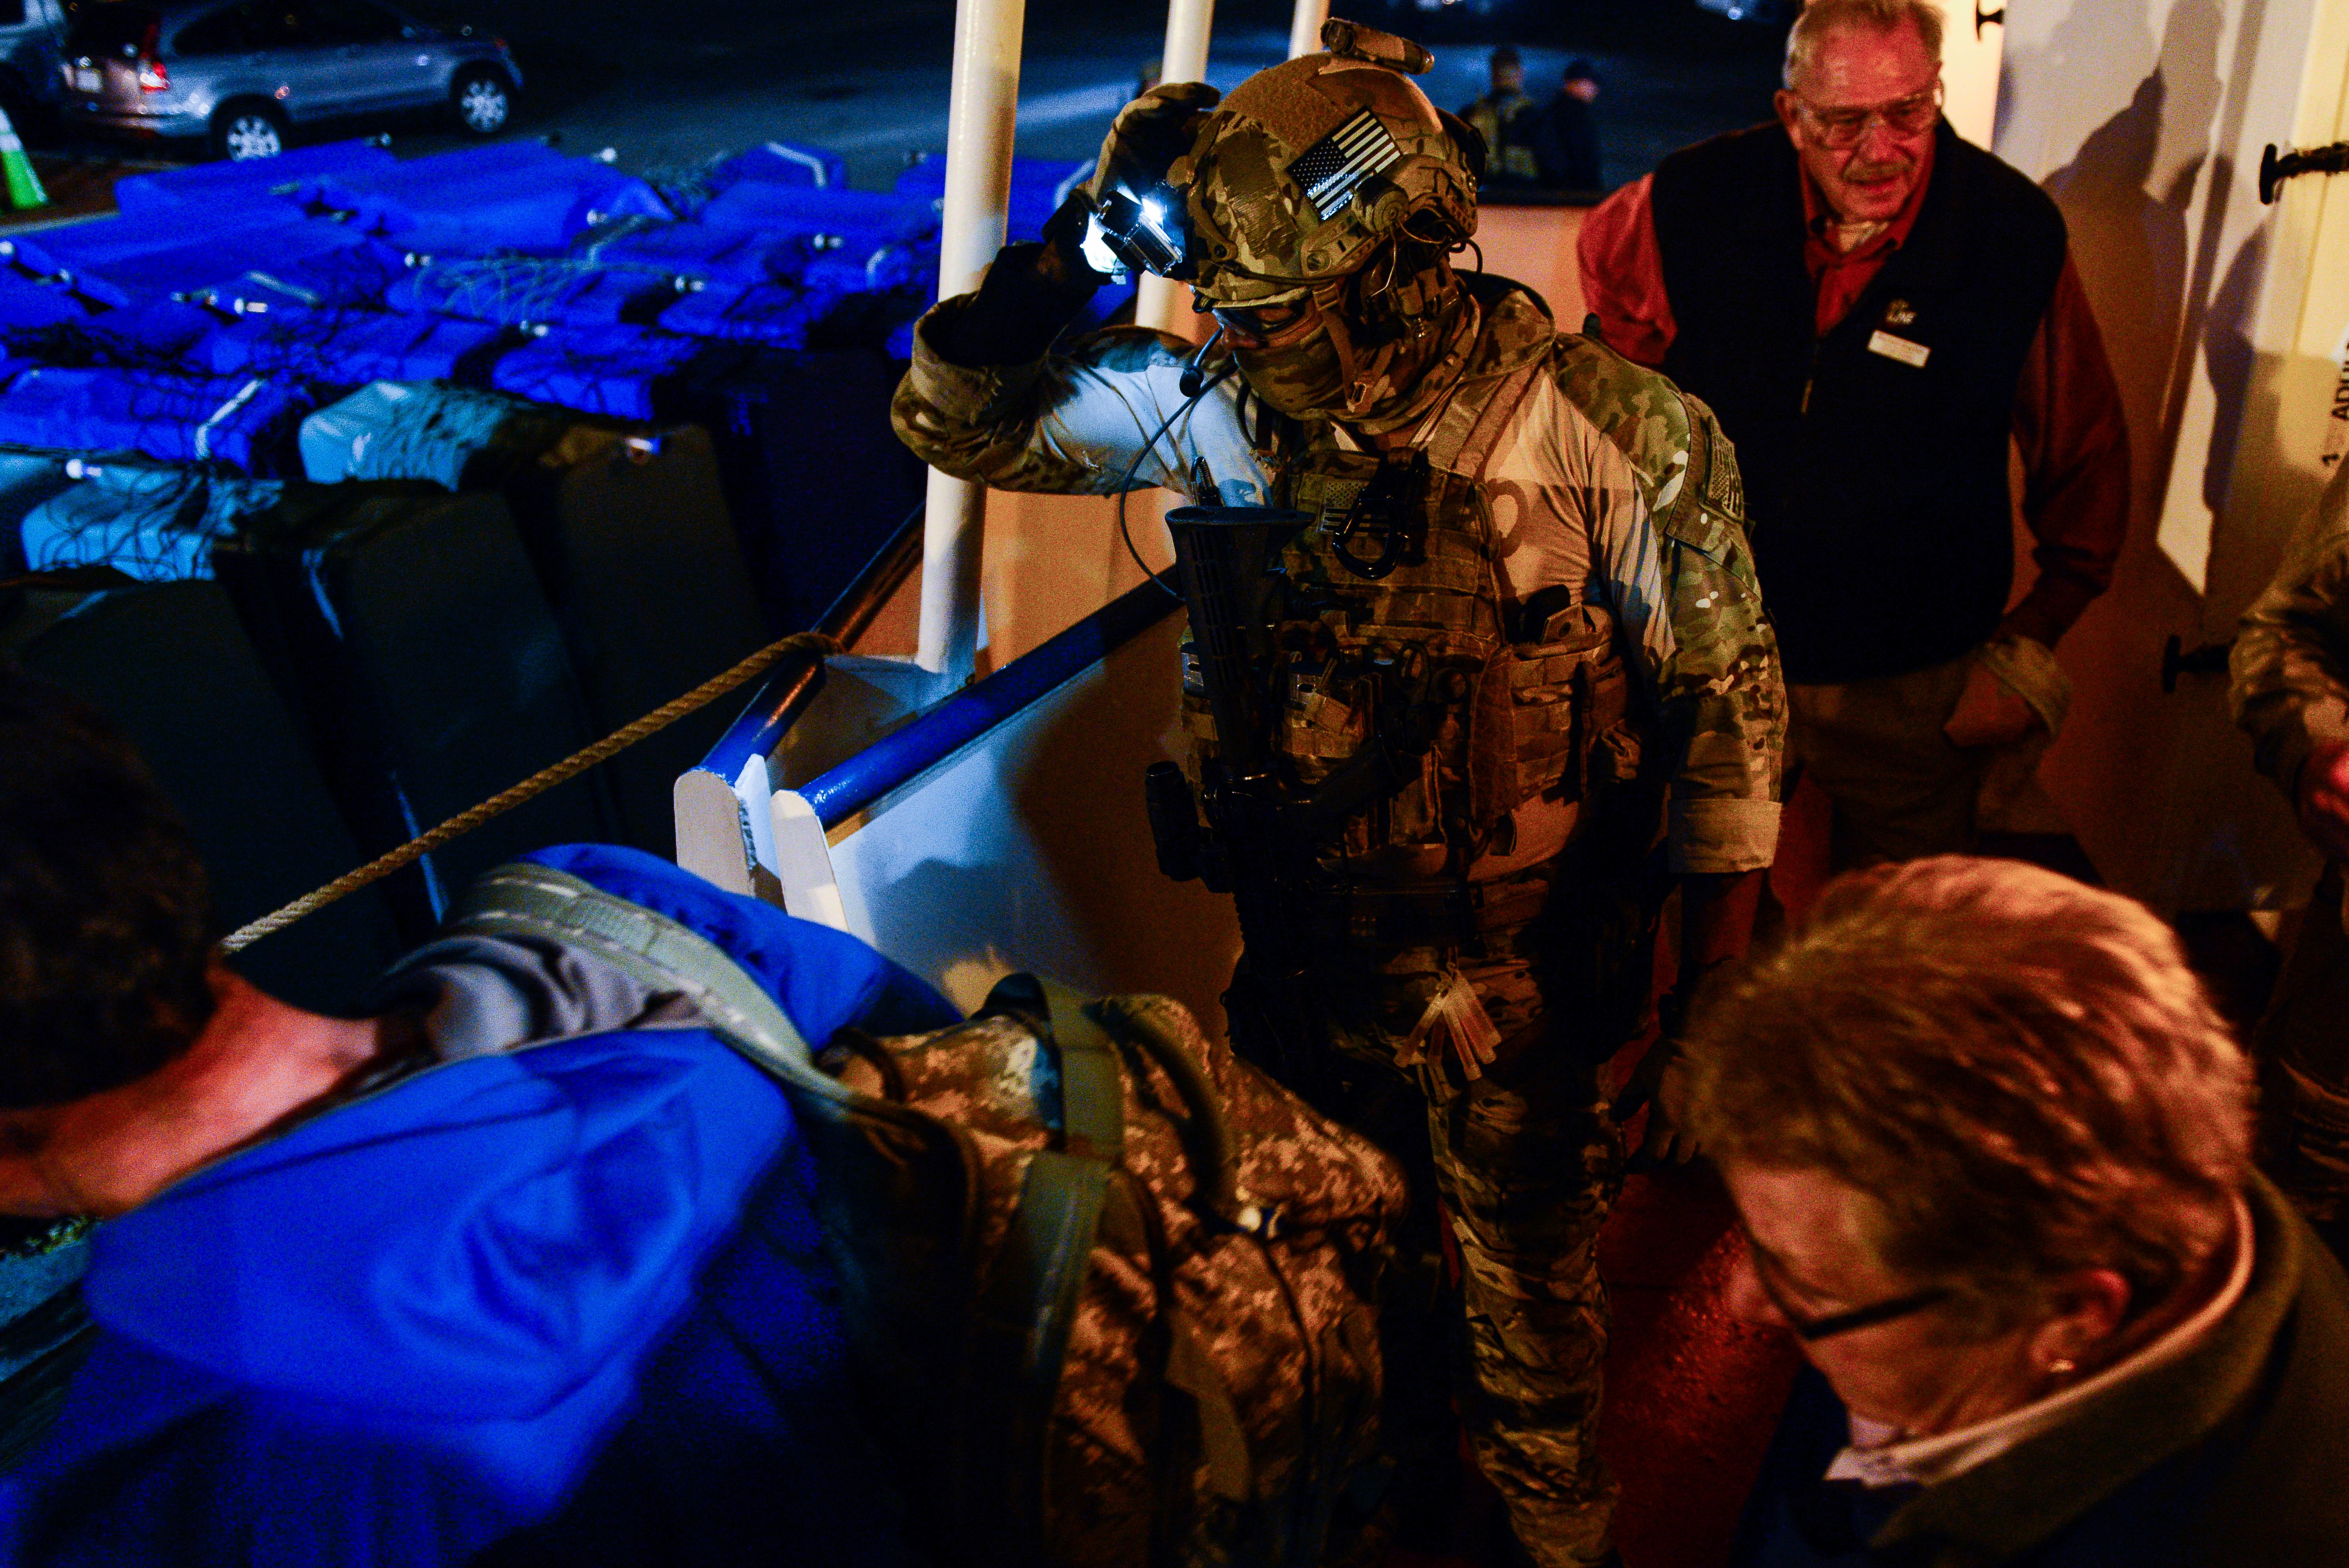 The Coast Guard’s Maritime Security Response Team (MSRT) from Virginia participates in a training evolution in Hyannis, Mass., Thursday, Oct. 22, 2015. The highly trained and specialized team, using a real-world underway ferry, practiced tactical boardings-at-sea, active shooter scenarios, and detection of radiological material. (U.S. Coast Guard photo by Petty Officer 3rd Class Ross Ruddell)